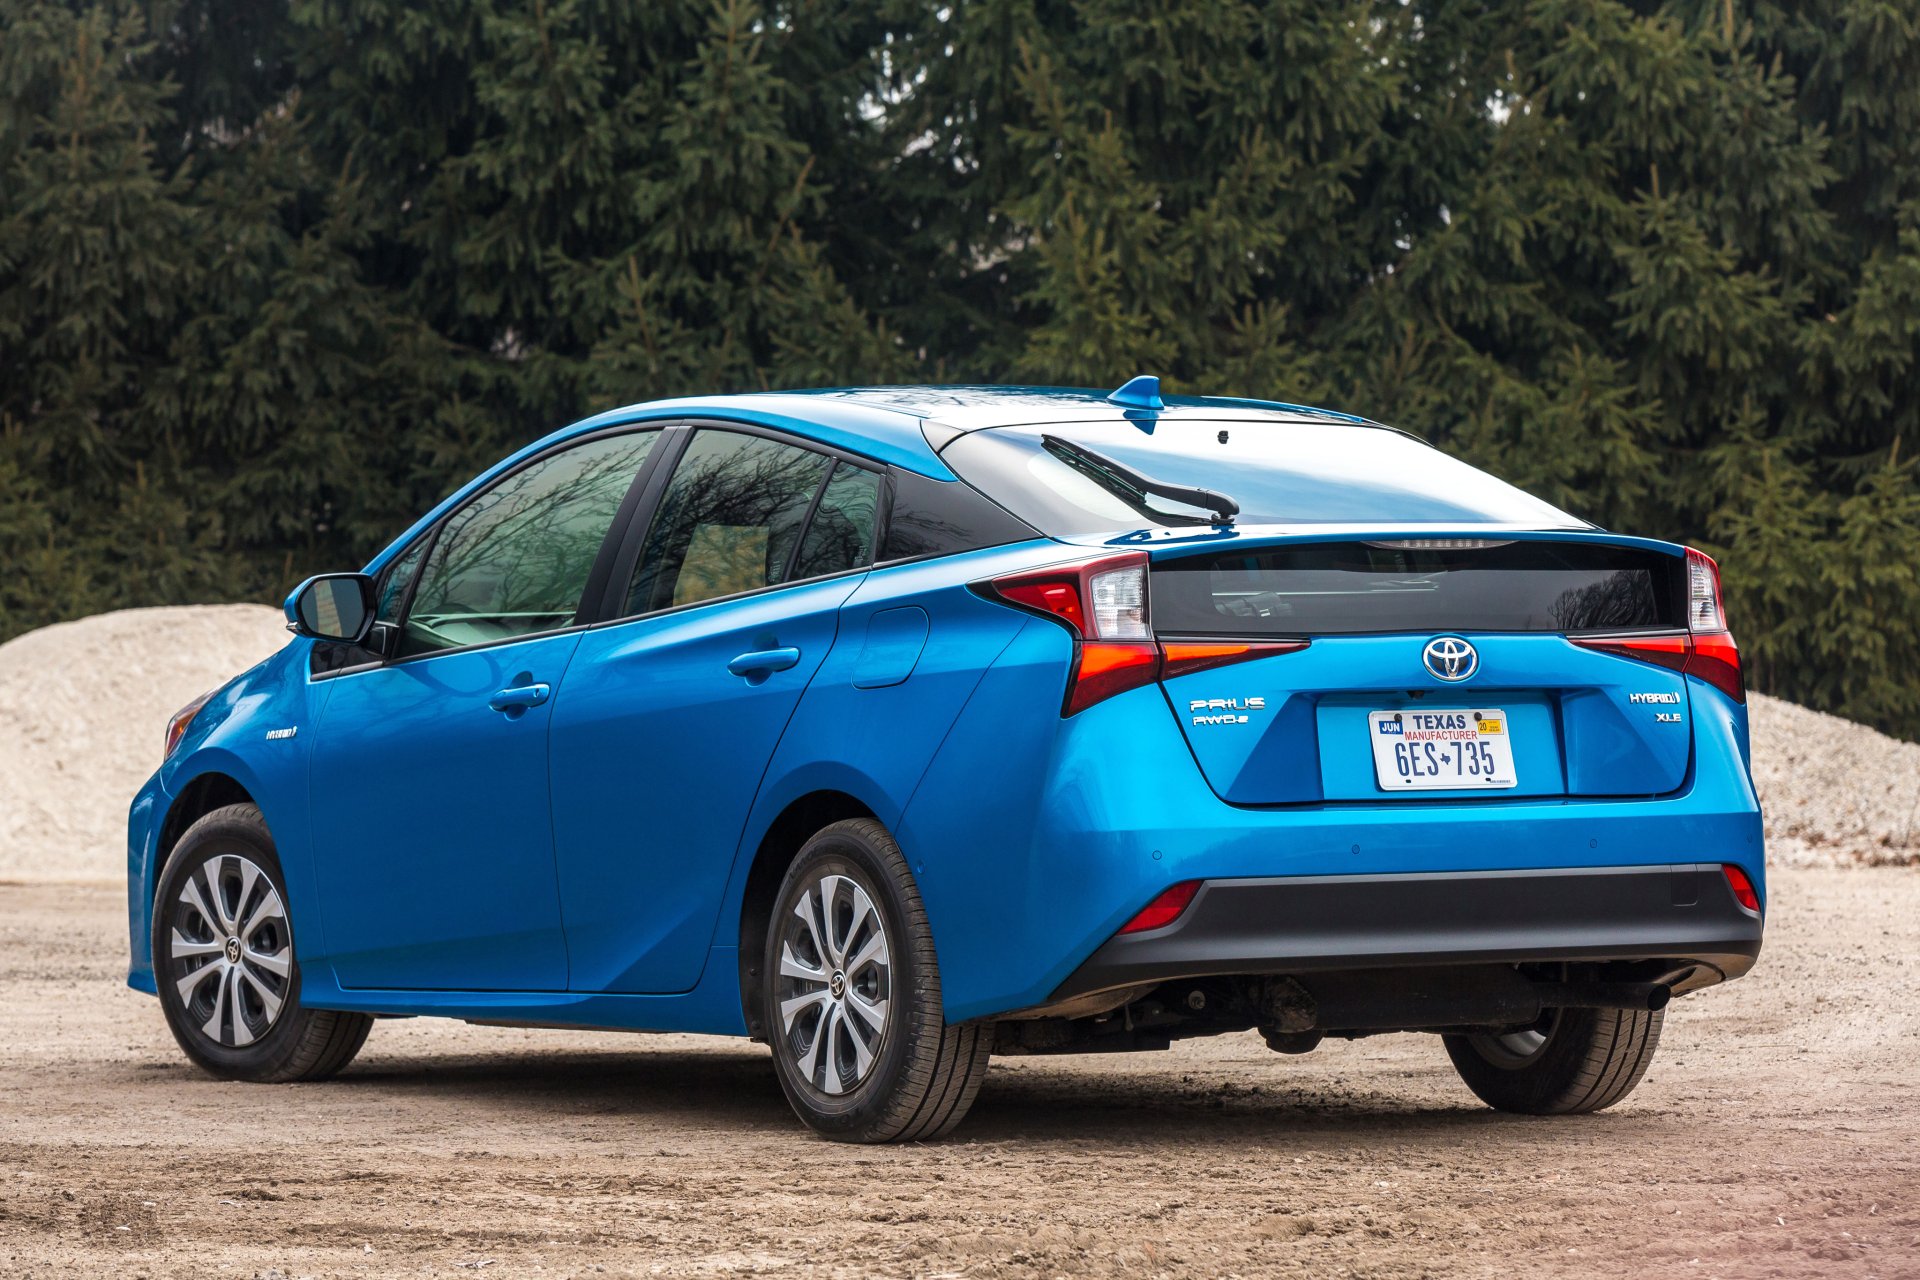 The Iconic Toyota Prius Will Get a Fifth Generation, Hybrid Powertrain